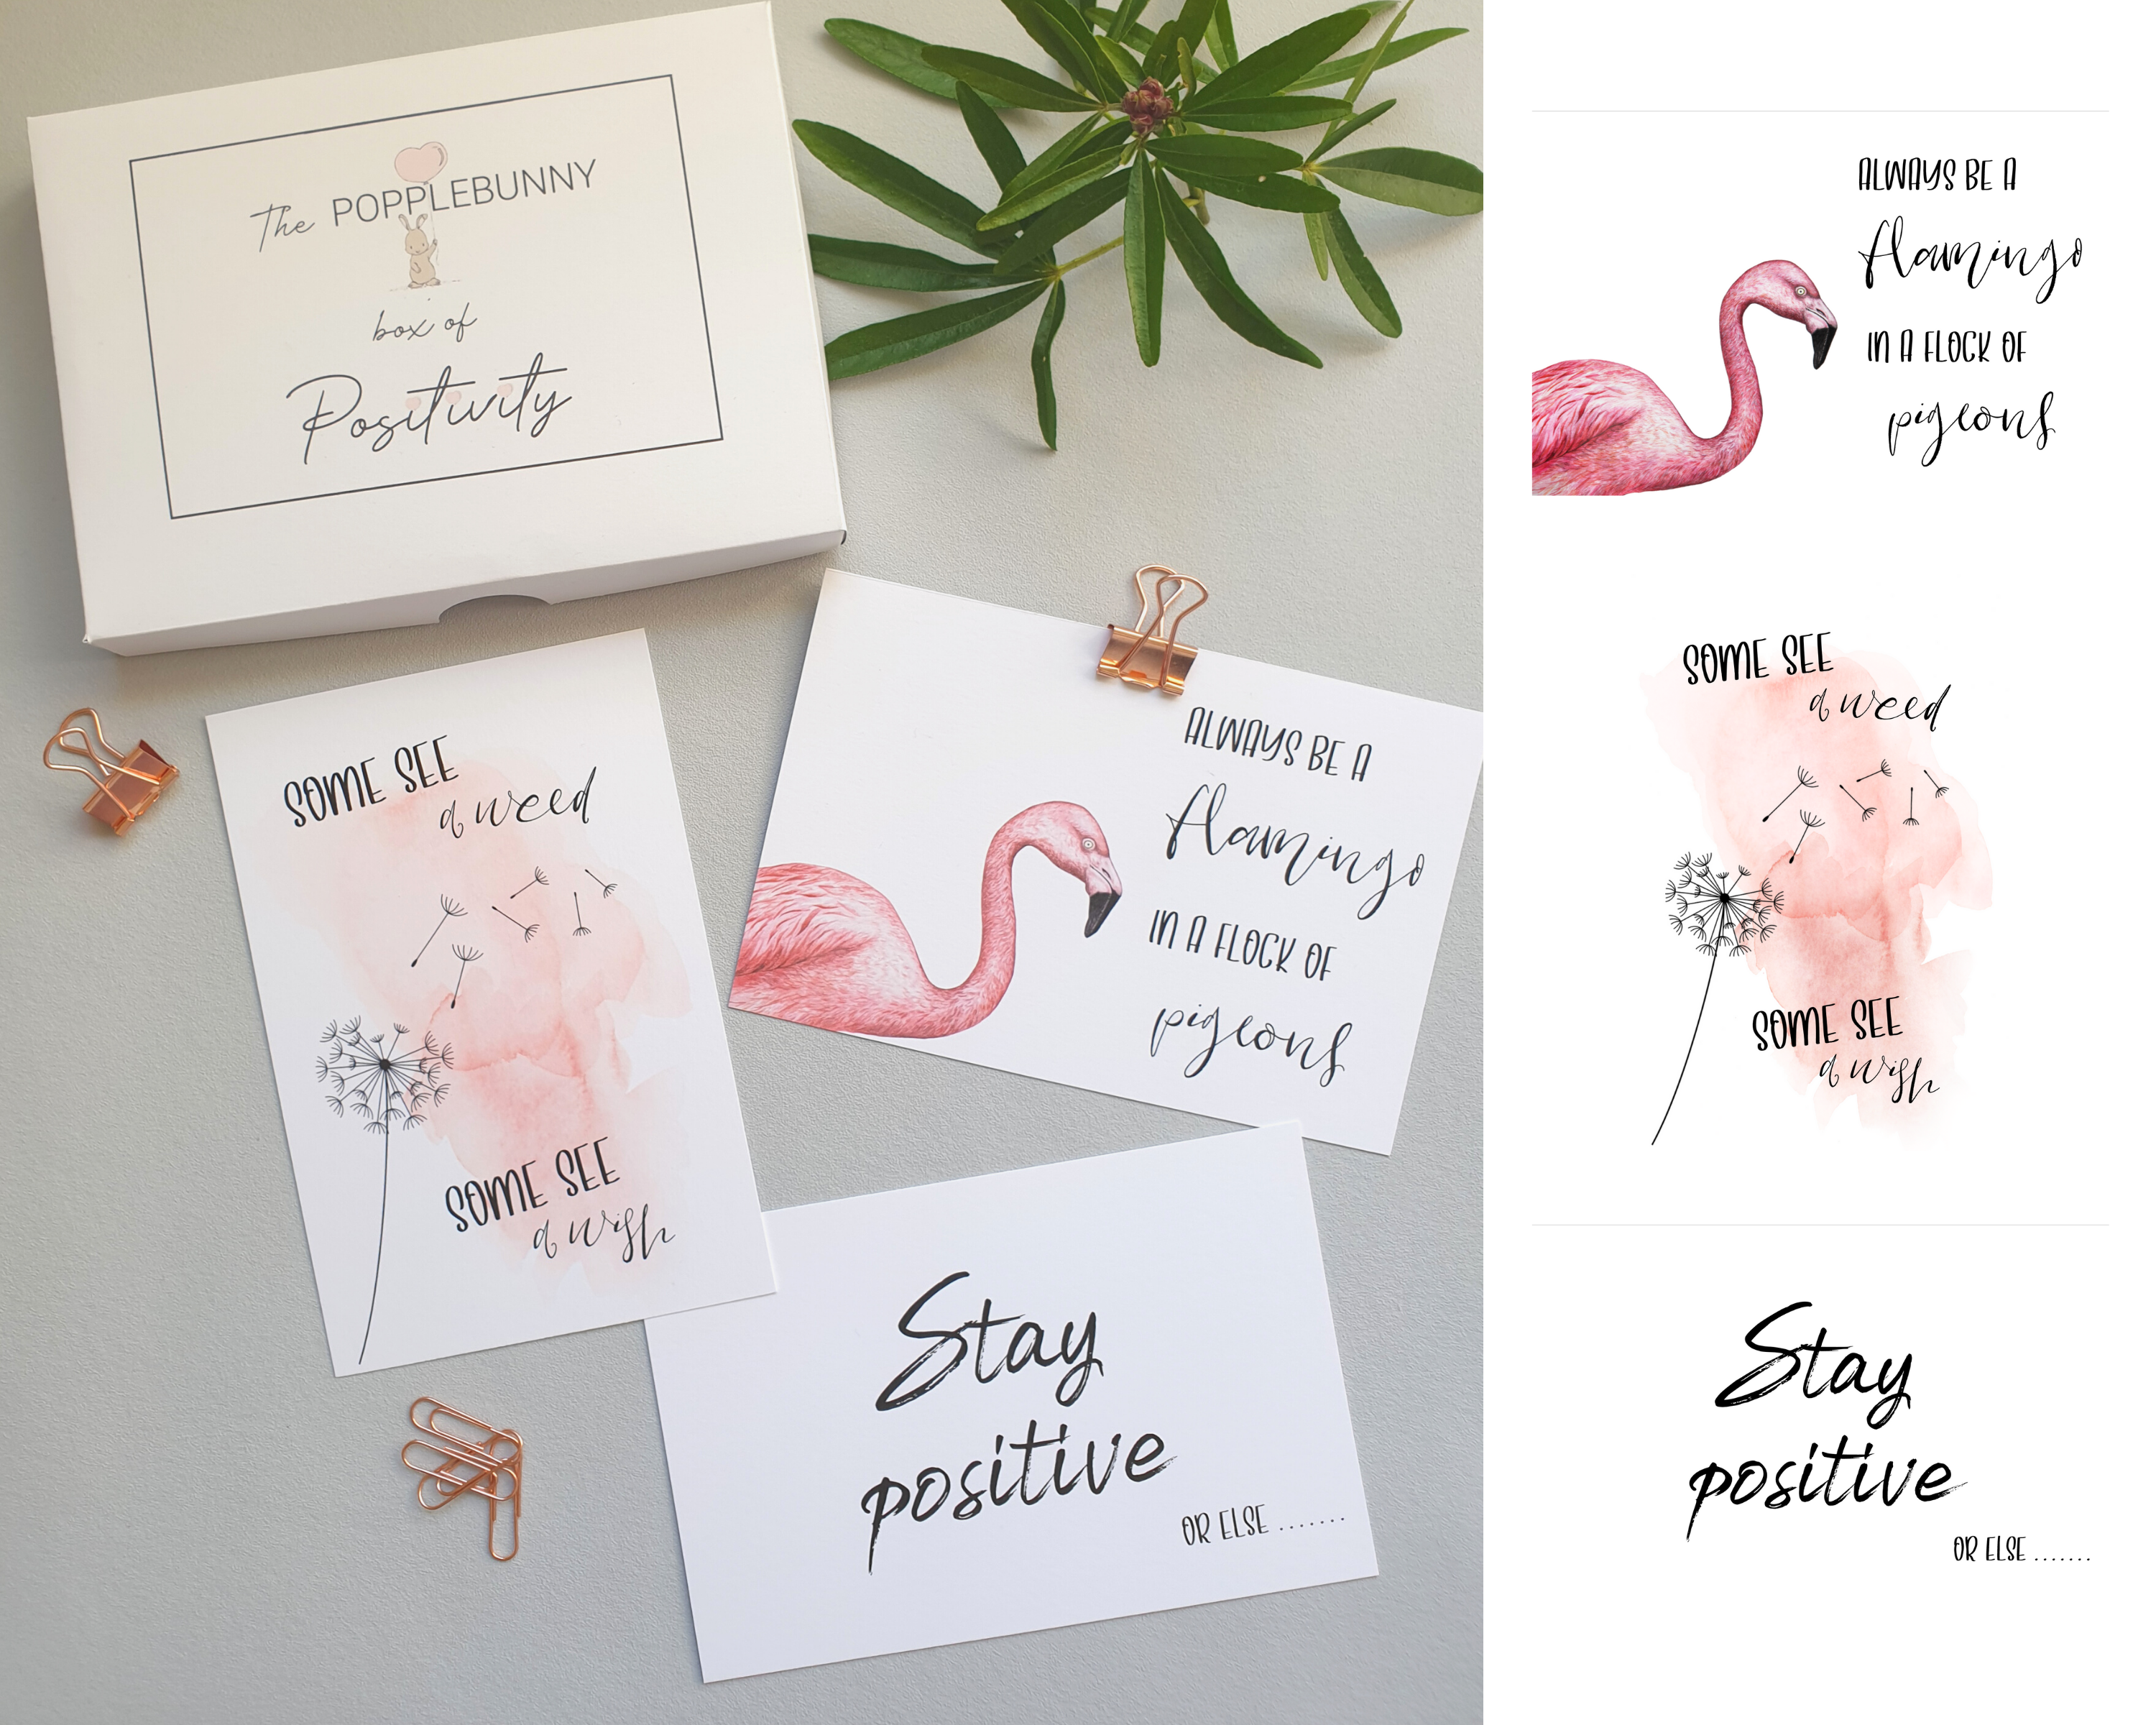 3 Poppleberry A6 positivity postcards, with pink illustrations, uplifting messages and presentation box, on white cardstock.